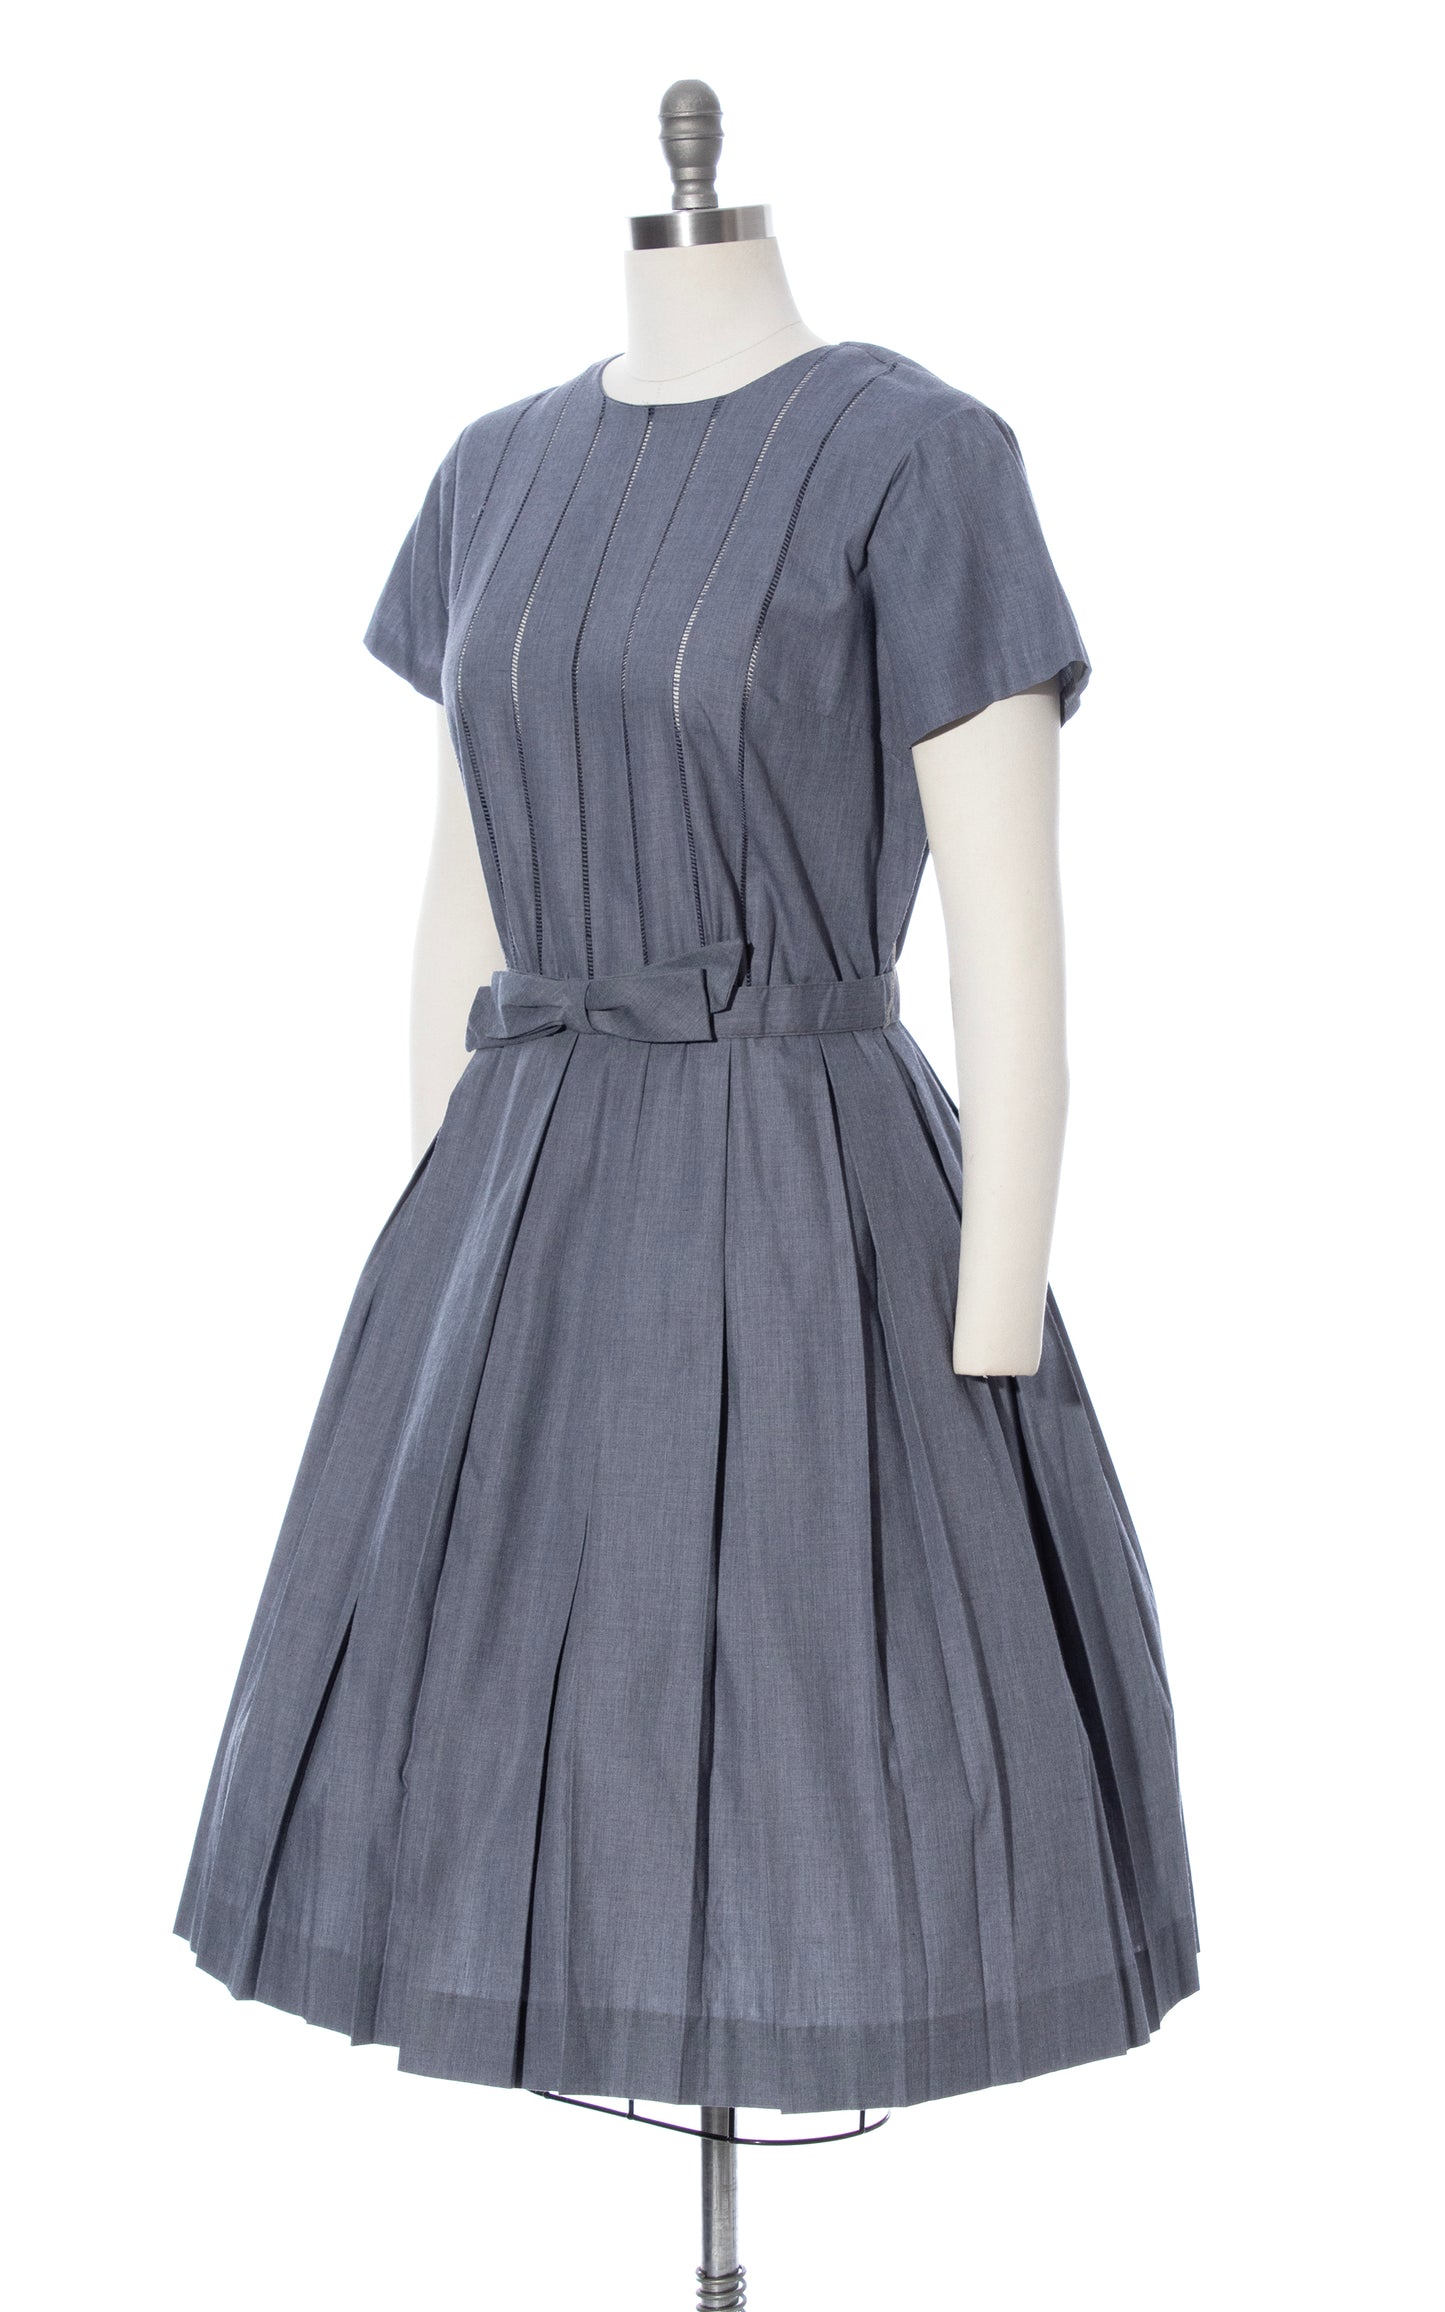 Vintage 1950s 50s Grey Fit and Flare Cotton Day Dress with Bow Belt BirthdayLifeVintage